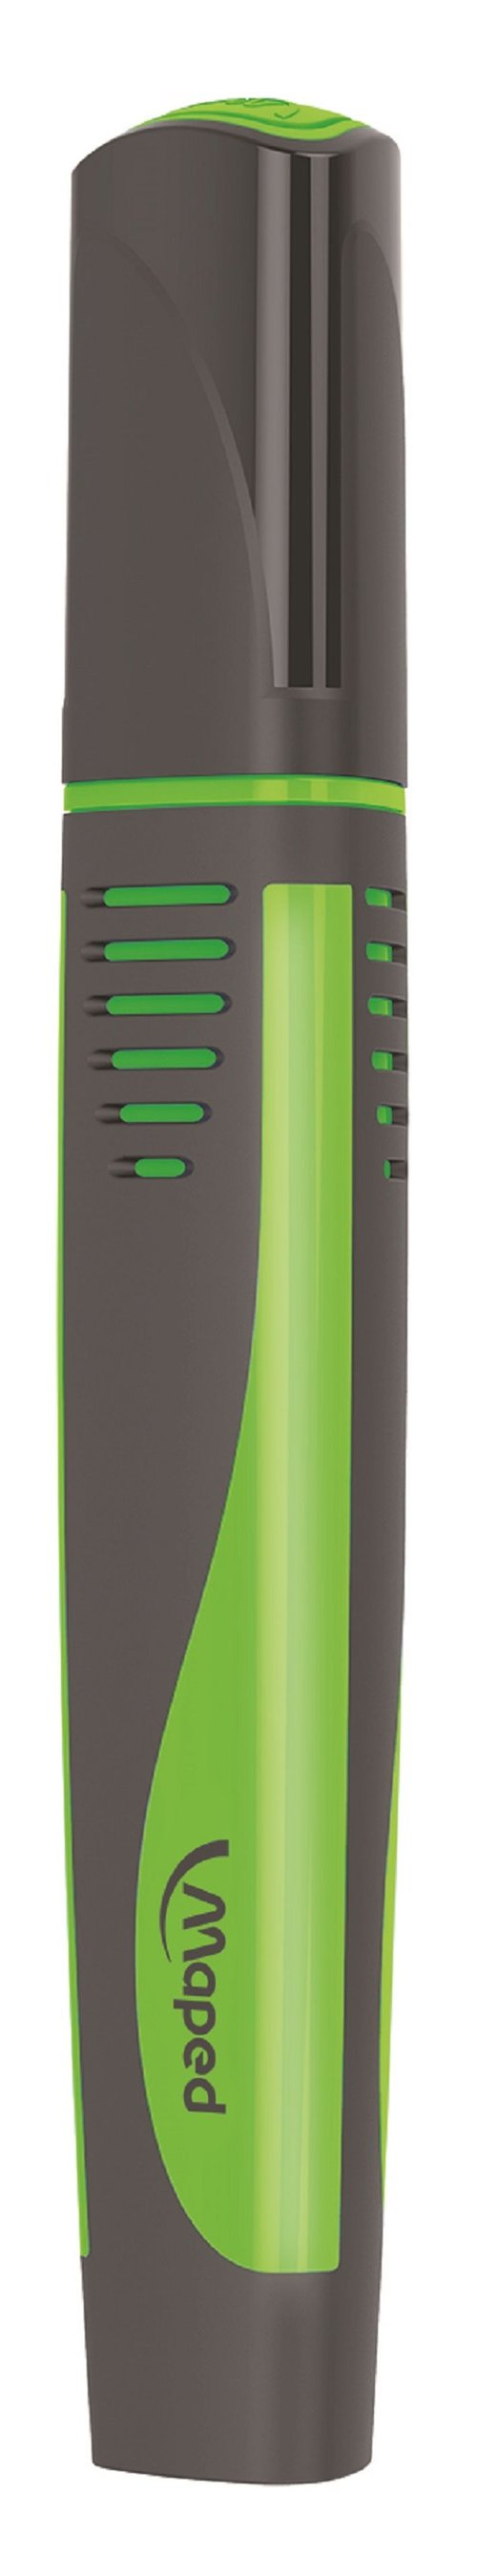 MAPED Highlighter Fluo Peps Max Green Display